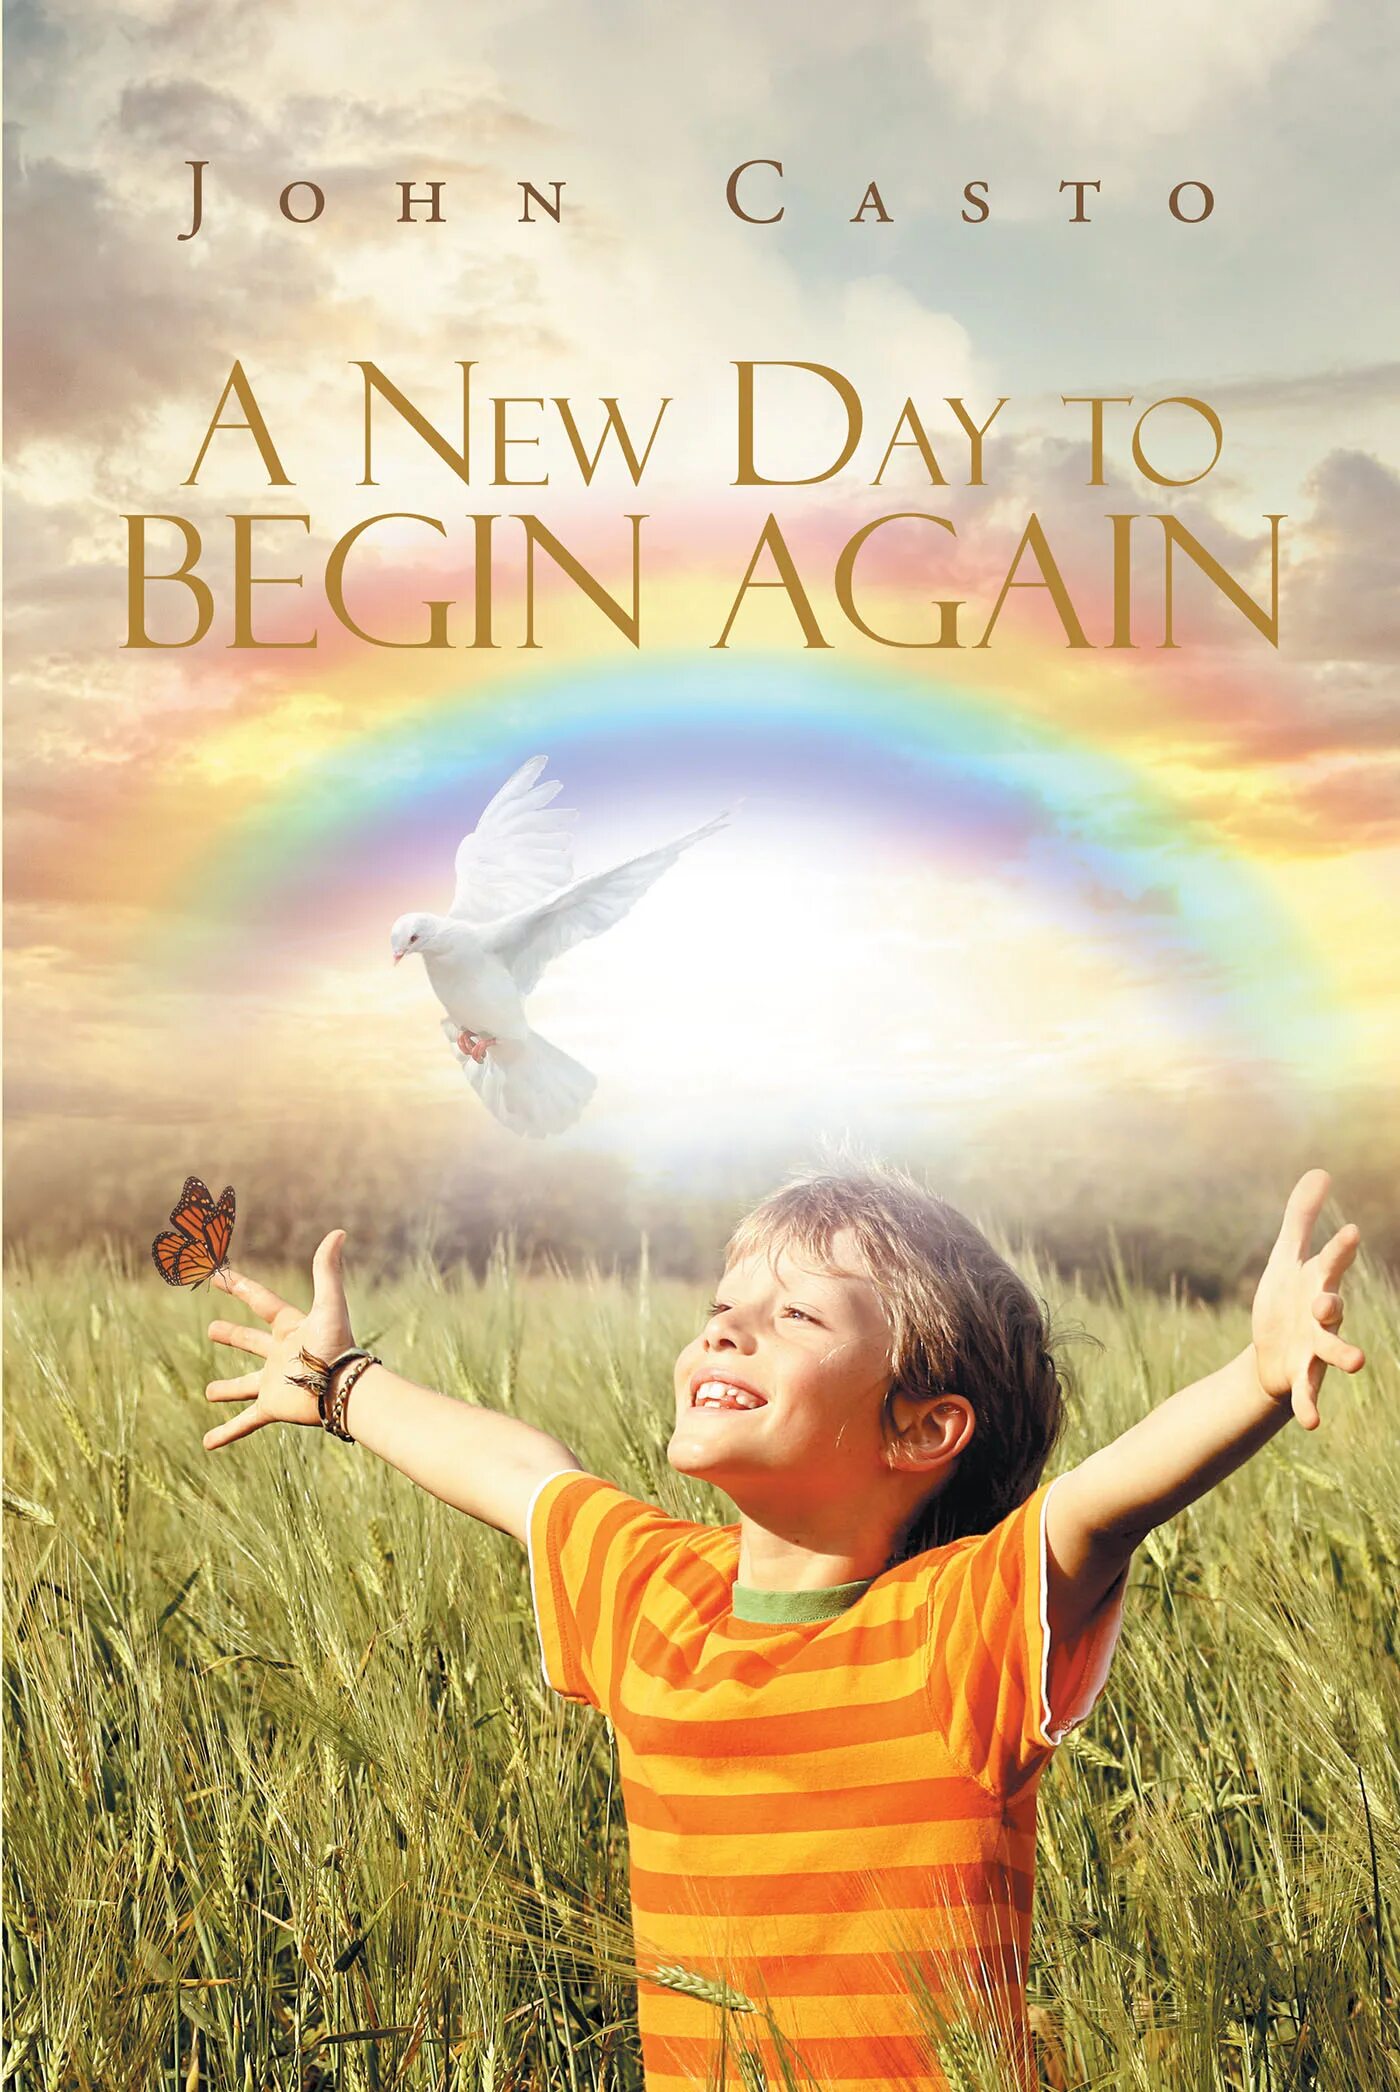 Know the new day. New Day картинки. Begin again книга. Days of the New Days of the New. Фото a New Day.